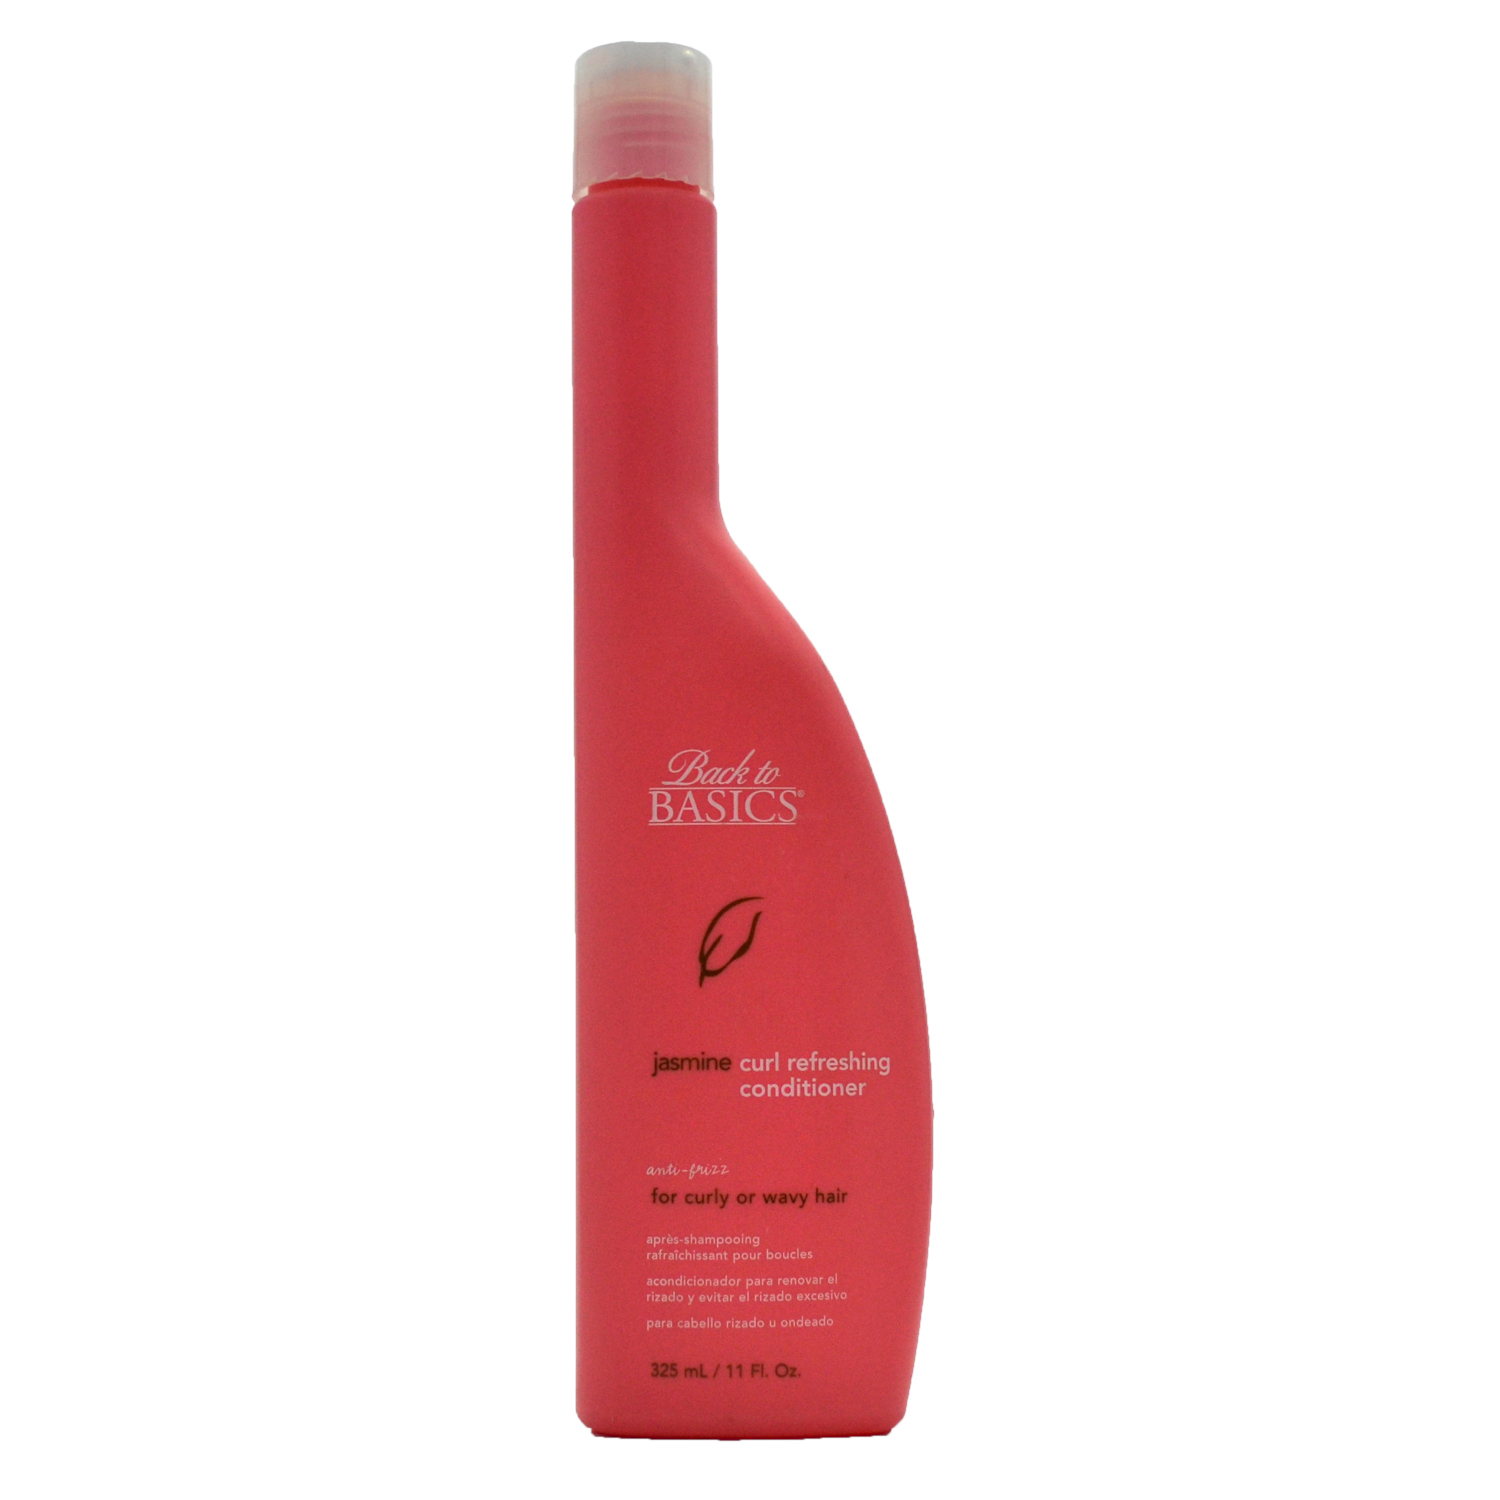 Primary image for Back to Basics Jasmine Curl Refreshing Conditioner 11 oz.